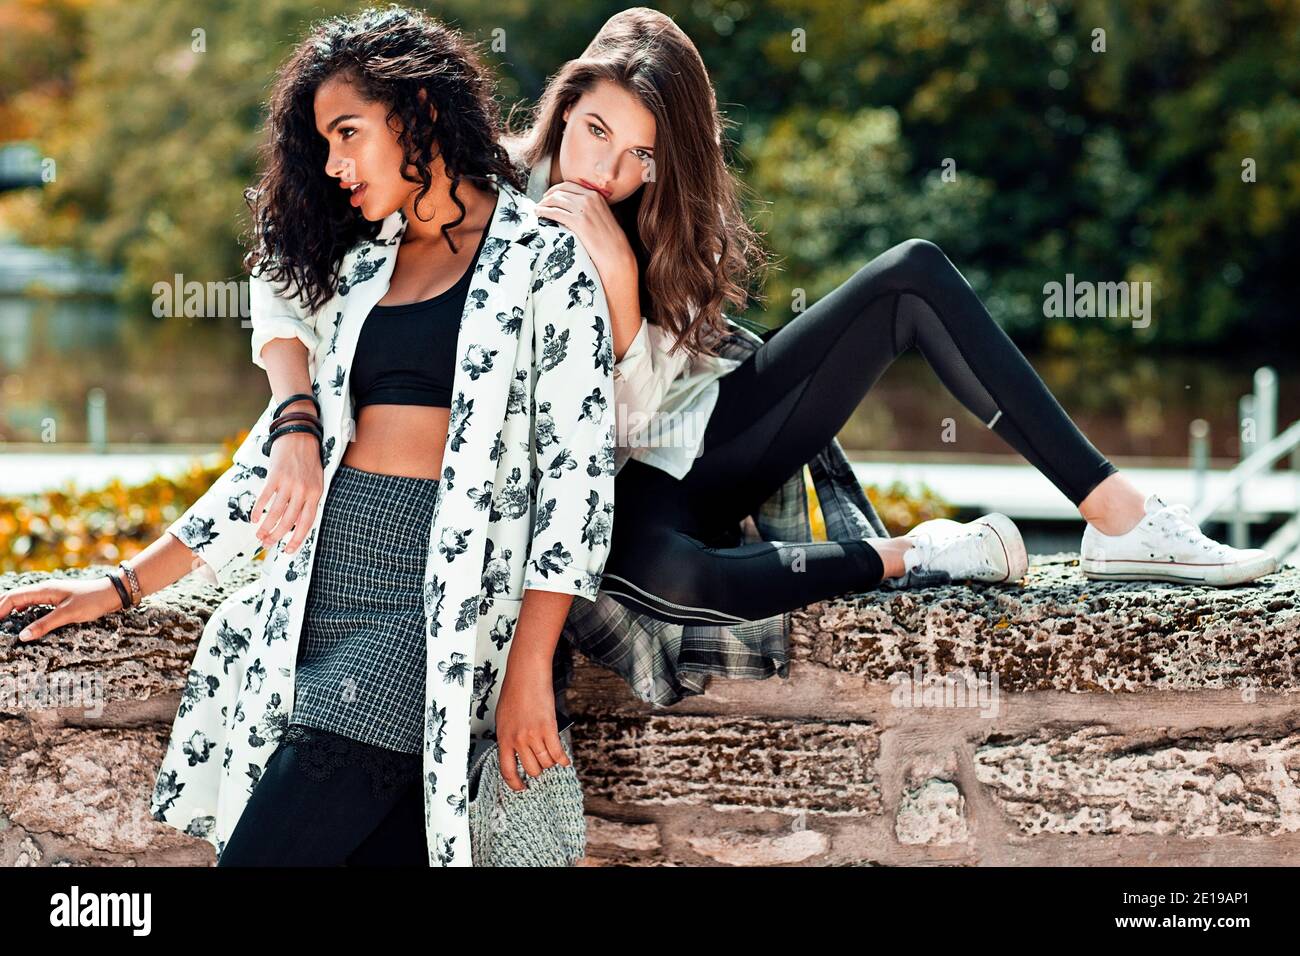 Portrait of 2 young adult women lounging on a stone wall in front of a lake at a natural park during a sunny day wearing cool urban outfits. Stock Photo